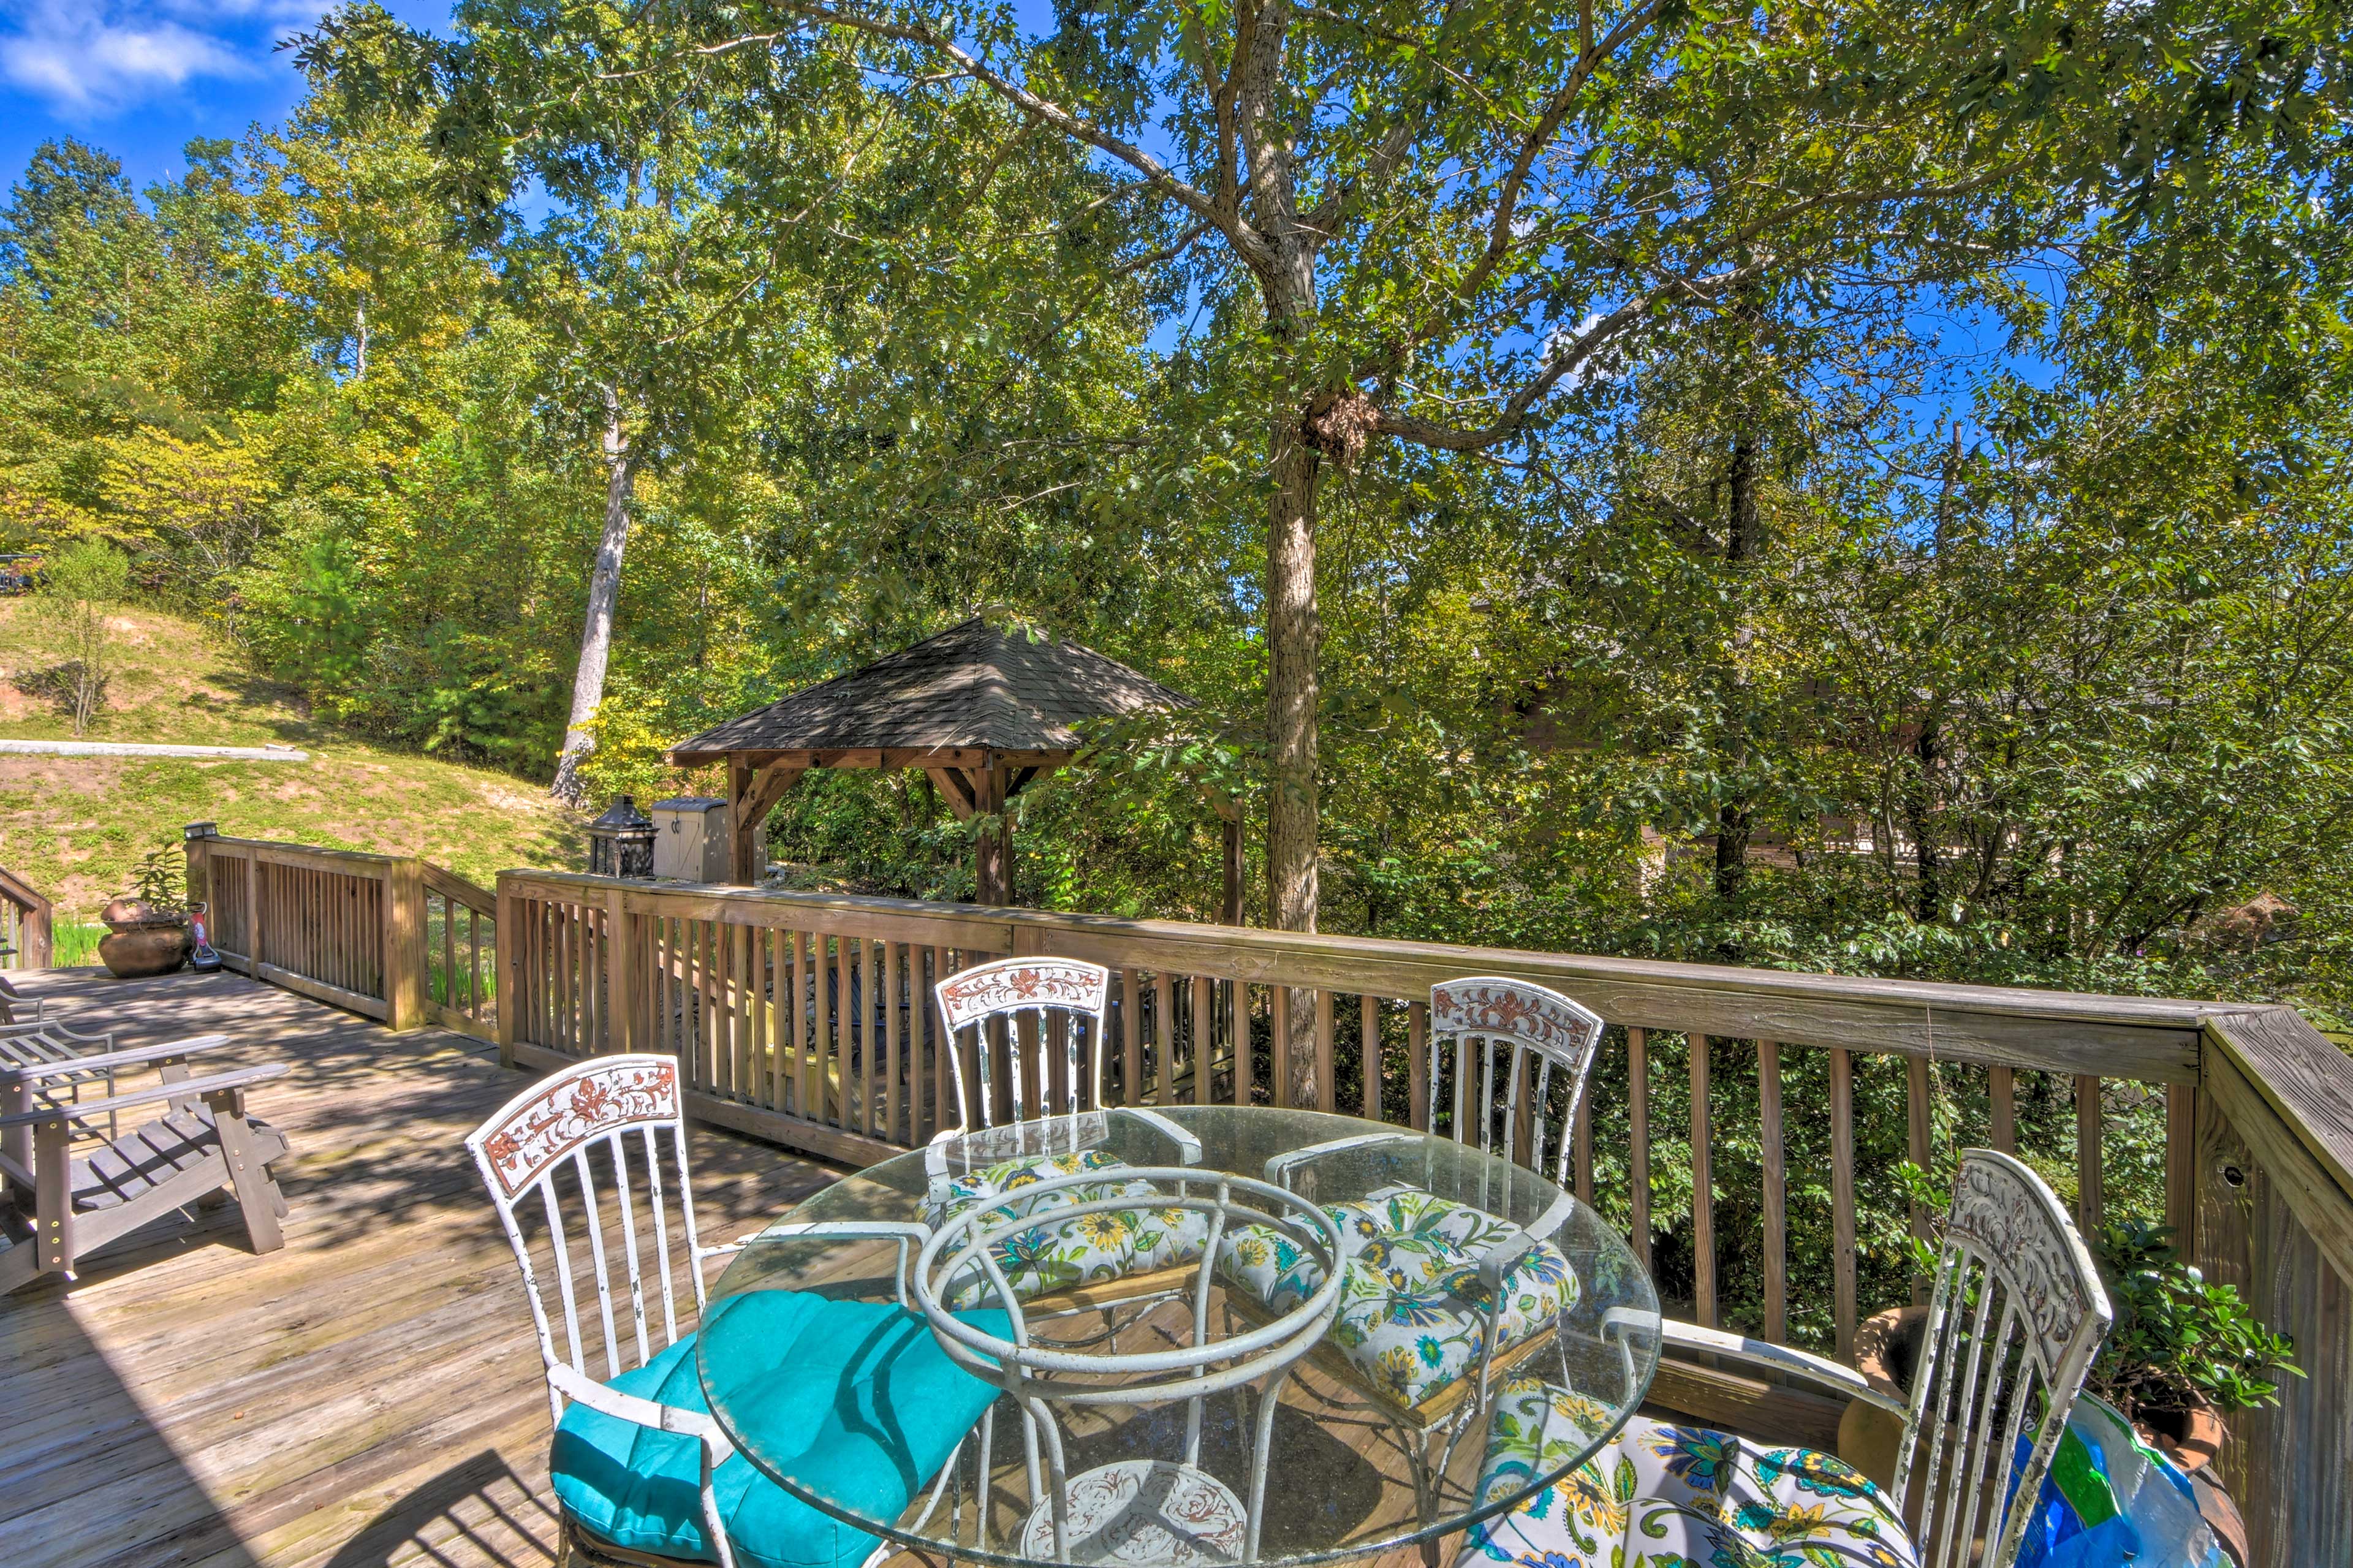 Lovely Lake Hartwell Retreat: Dock, Deck & Grill!